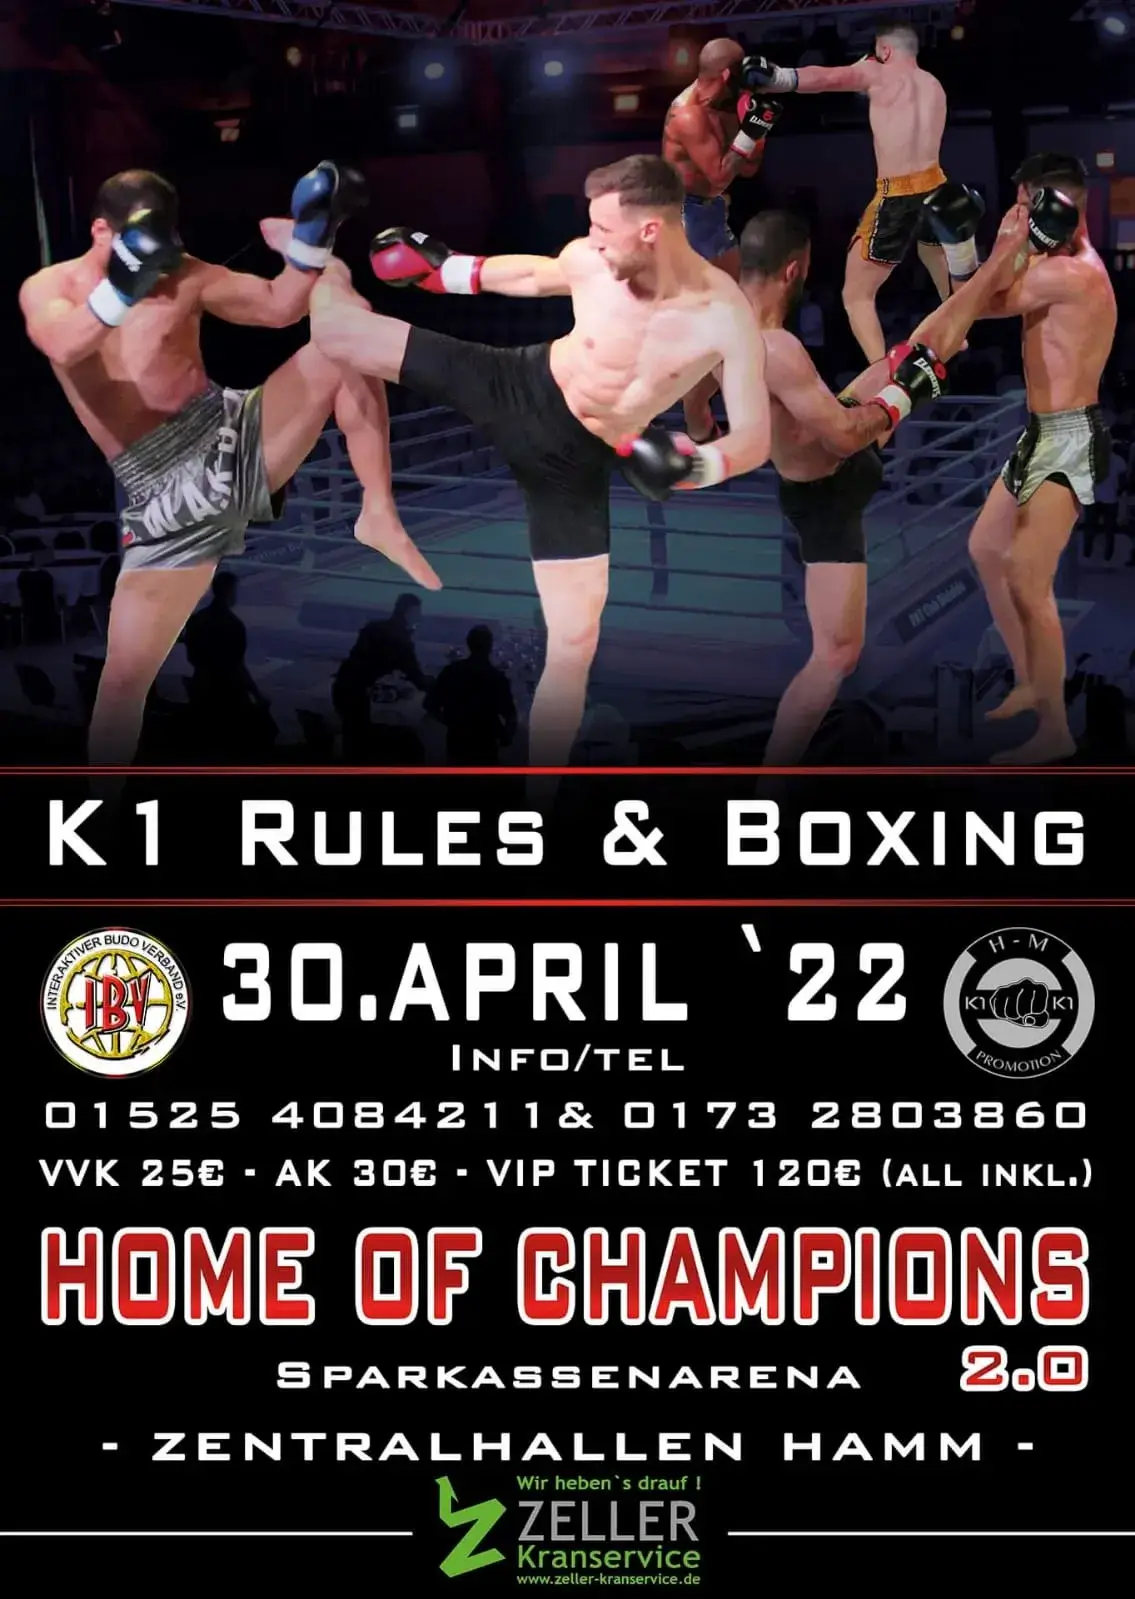 Home of Champions 2.0 am 30 April 2022 in Hamm